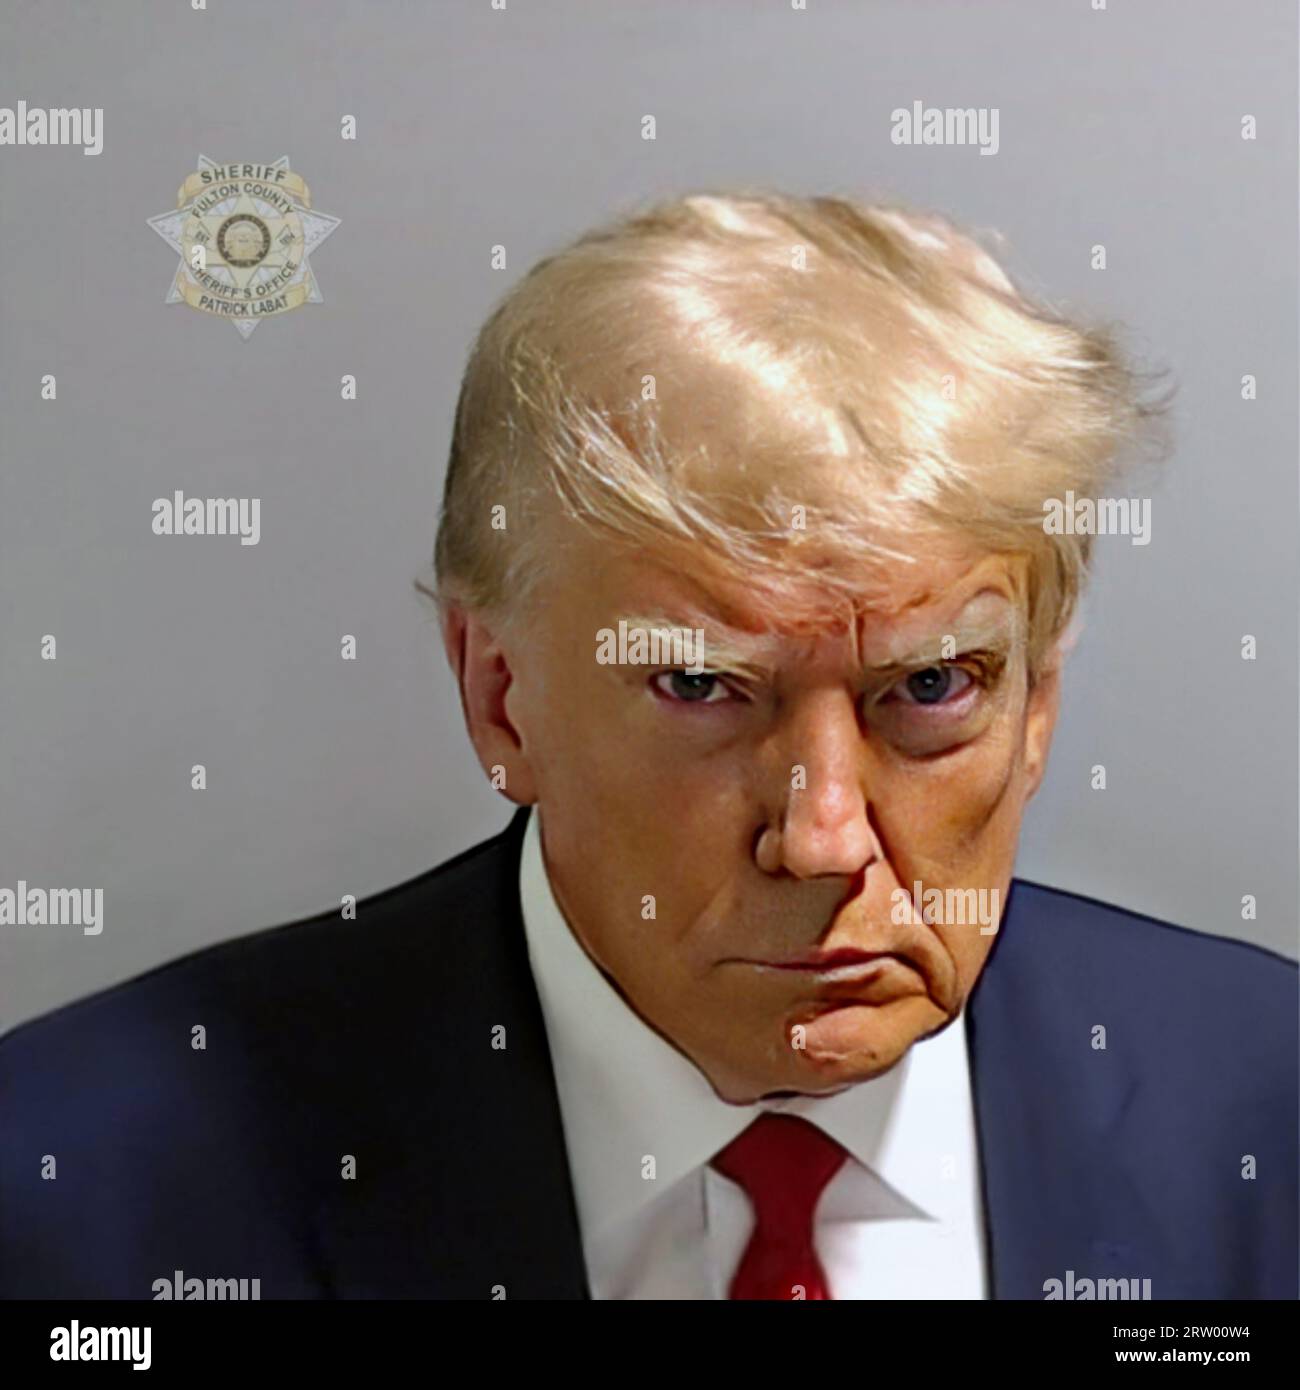 2023 , 25 august , Atlanta , Georgia , USA : The Ex 45Th President of United States  DONALD John TRUMP ( born June 14 , 1946 in New York City ), mugshot released after arrest in Atlanta , FULTON COUNTY Patrick Labat SHERIFF OFFICE . On charges of plotting to overturn the State's 2020 Election results in an arrest that saw the first ever mugshot of a former US president  . Trump had to pay a bail bond of $200,000 to be released from the Atlanta jail while he awaits trial . Unknown photographer . - MUG SHOT - MUGSHOT - MUG-SHOT - FOTO SEGNALETICA - PRESIDENTE DEGLI STATI UNITI D'AMERICA  - POLIT Stock Photo